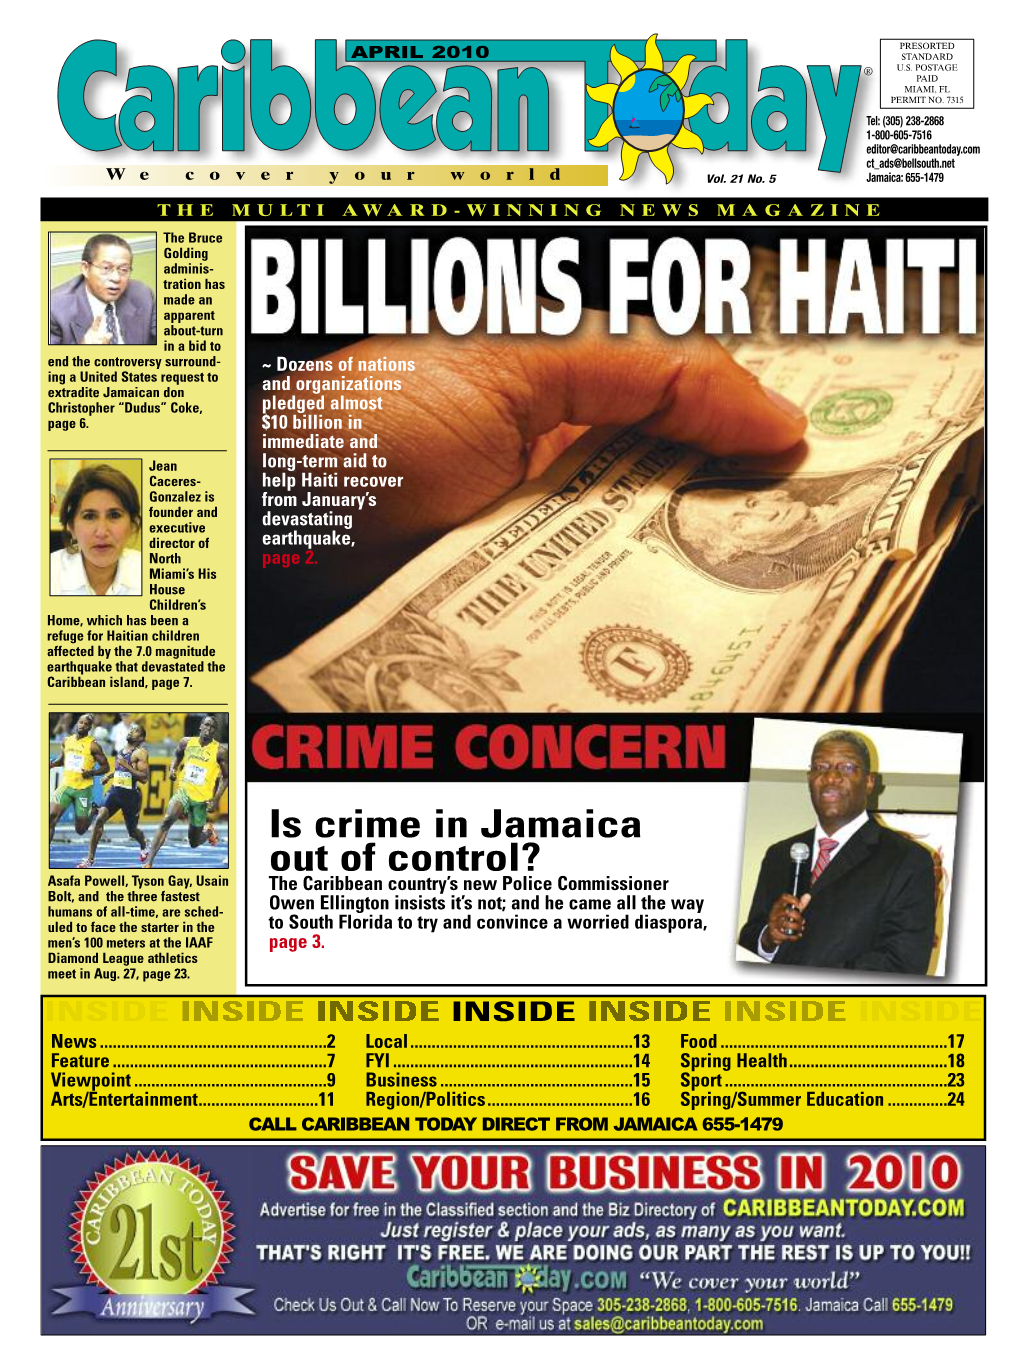 Is Crime in Jamaica out of Control?